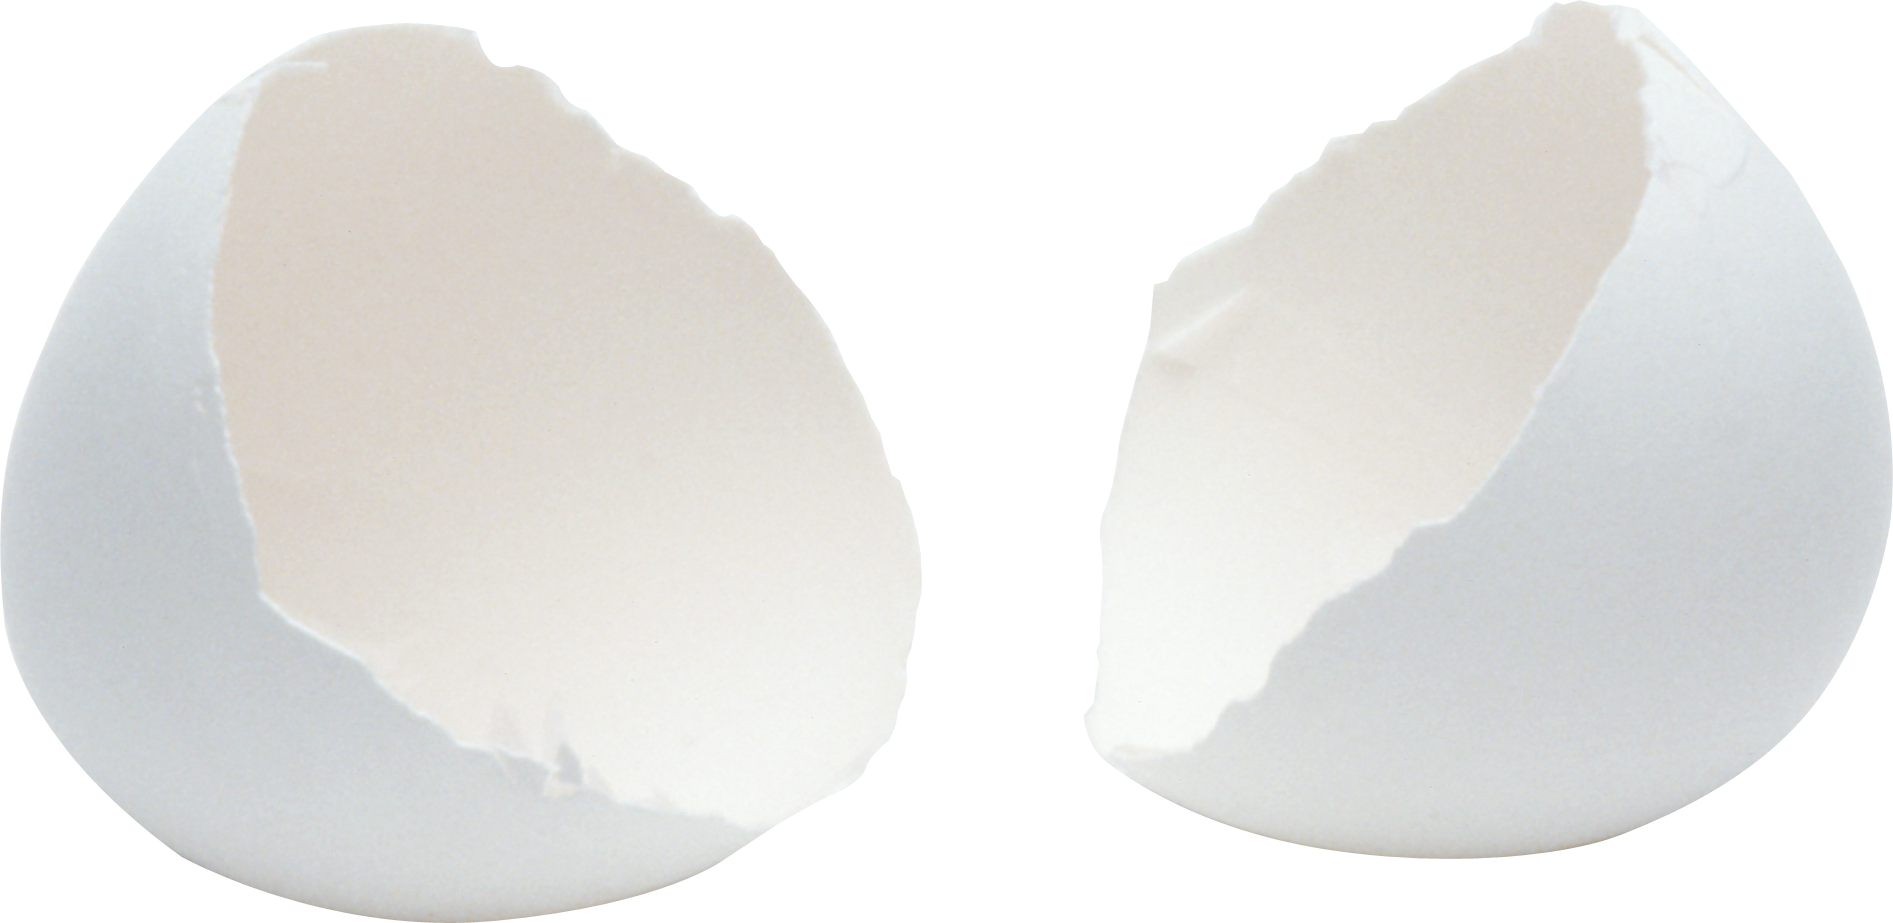 Cracked Egg PNG HD - 135653